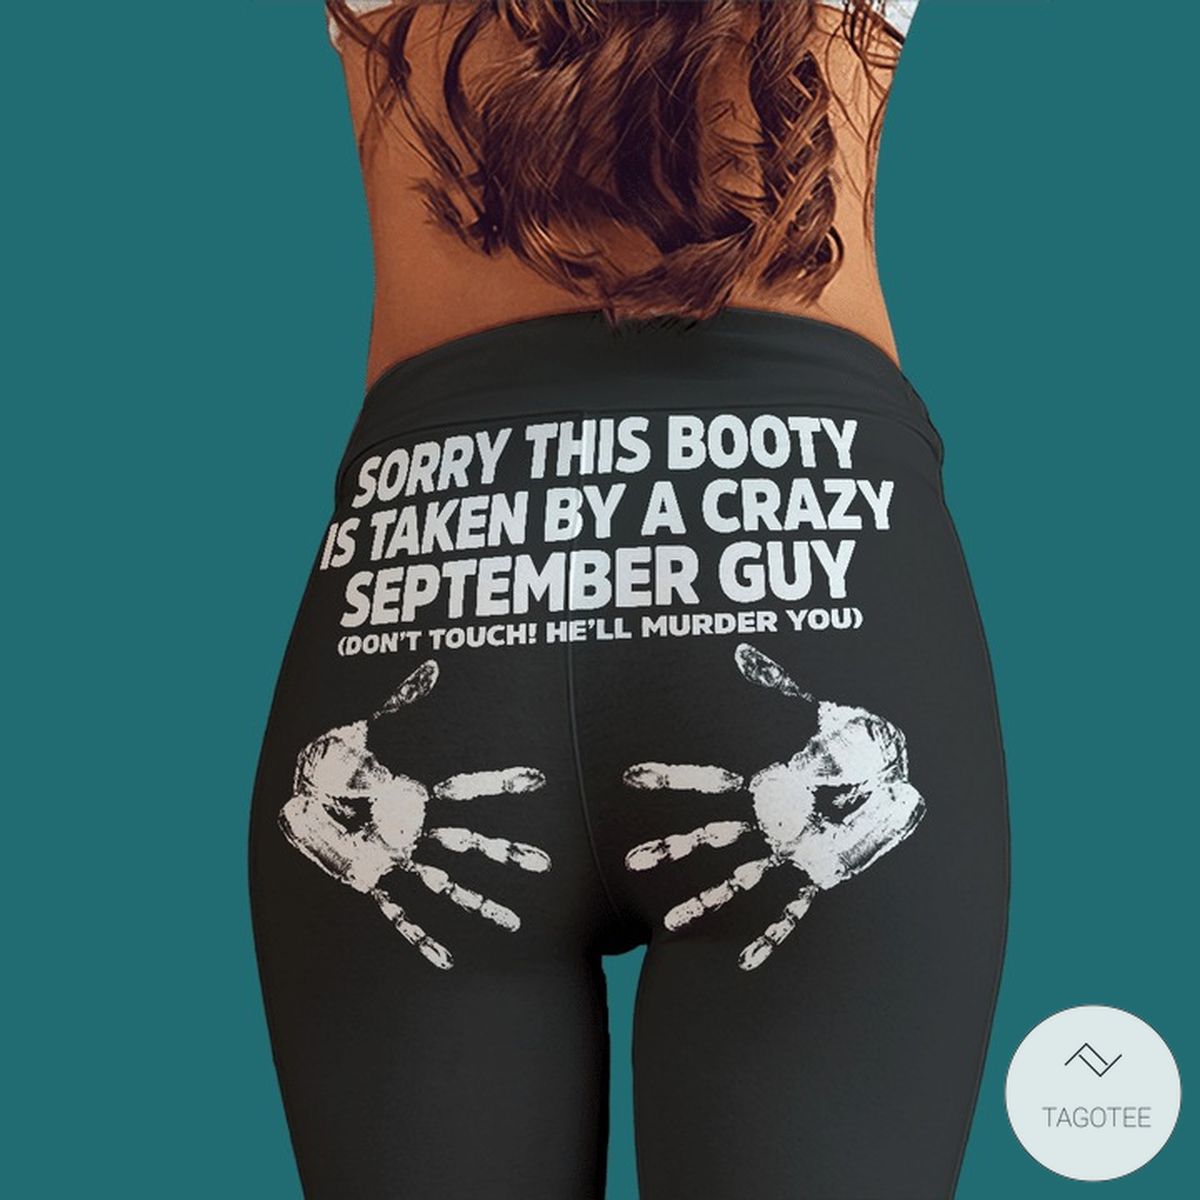 Sorry this booty is taken by a crazy September guy legging